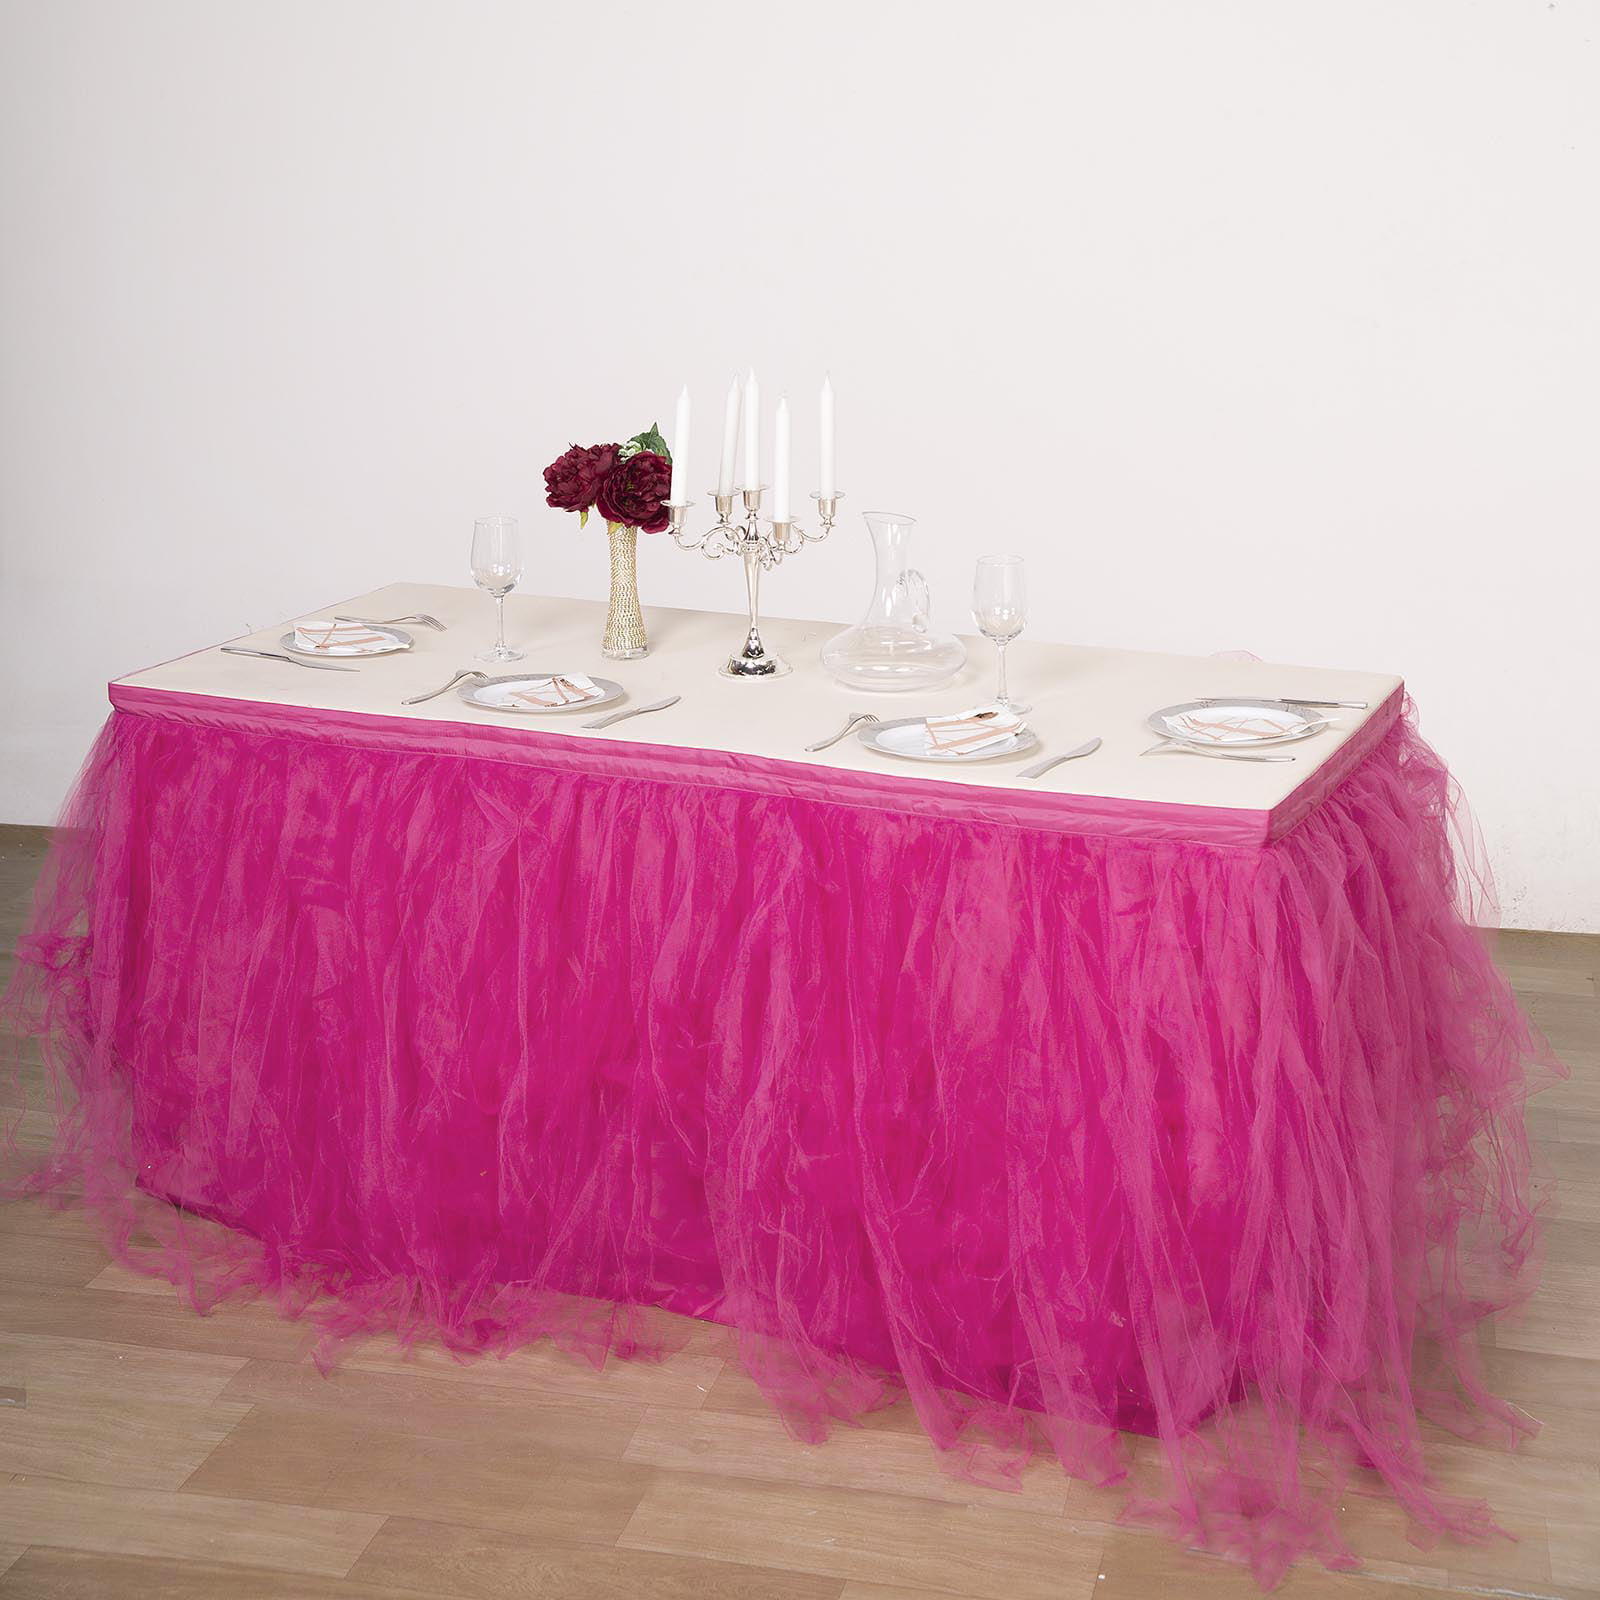 PiccoCasa Tutu Table Skirt Red Pink Tulle Table Skirt 4.7 Yards Fluffy Table Skirting for Party Birthday Wedding Cake Table Decoration L14 ft xH30in/1427x76cm